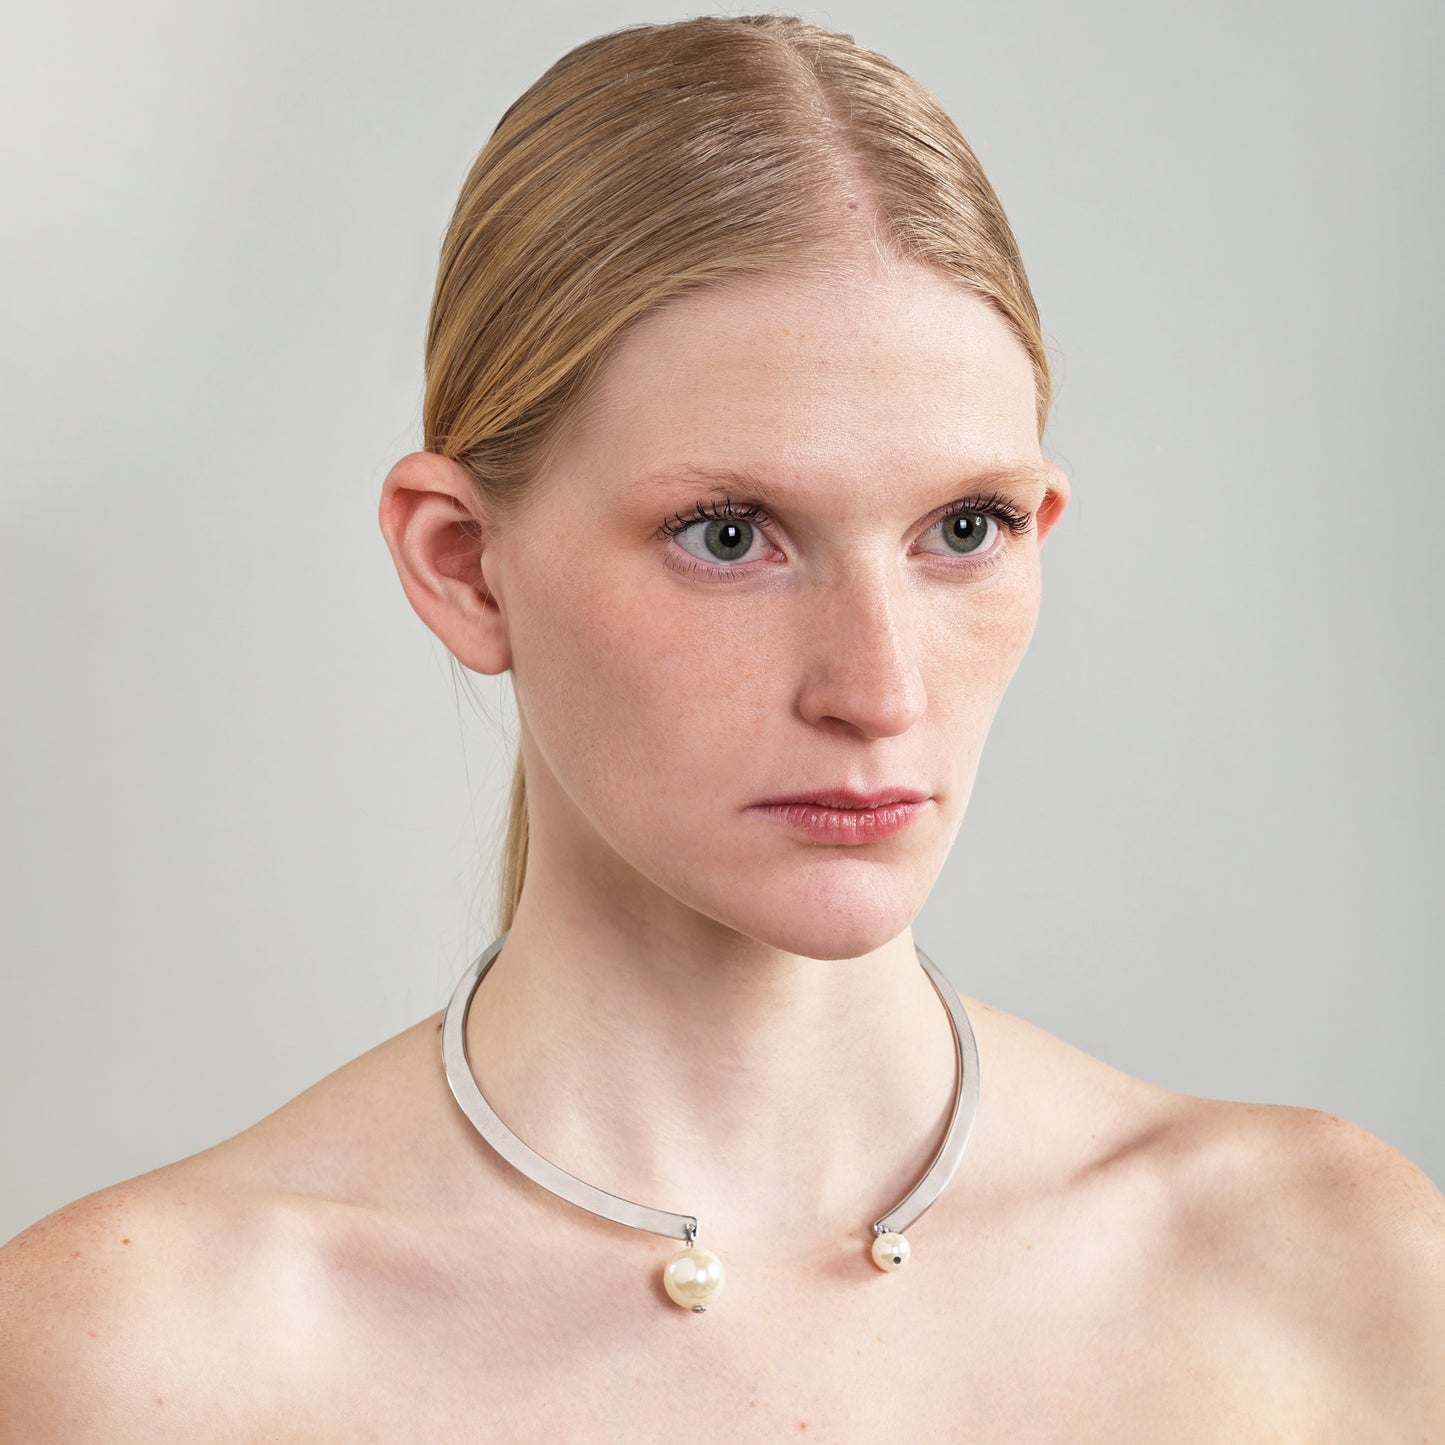 A silver choker necklace adorned with pearls can be a beautiful and versatile accessory.